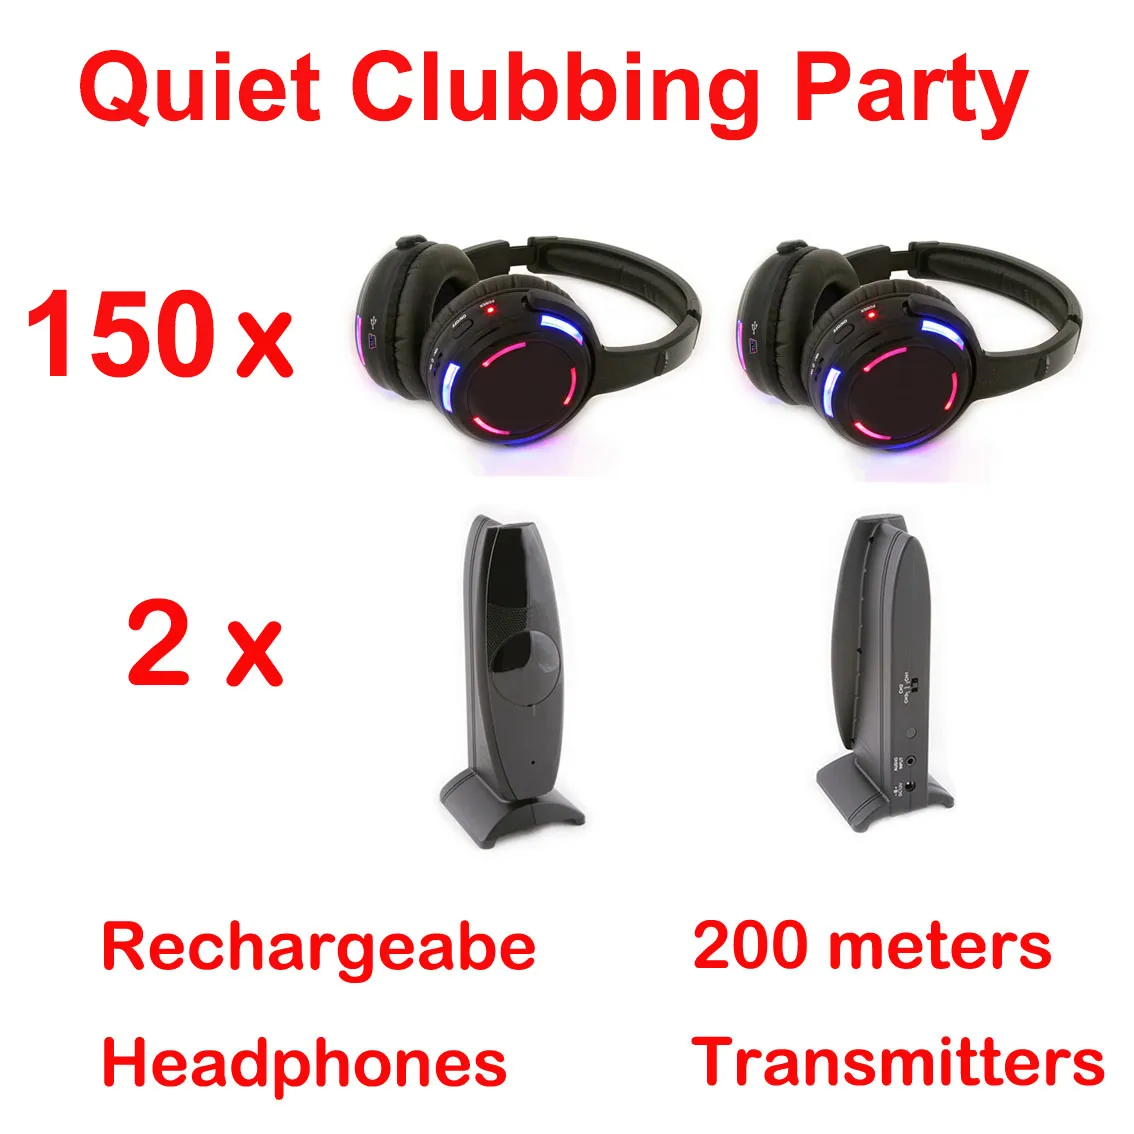 RF Silent Disco wireless Led headphones UHF headset- Quiet Clubbing Party Bundle with 150 Earphones and 2 Transmitters 200m Distance